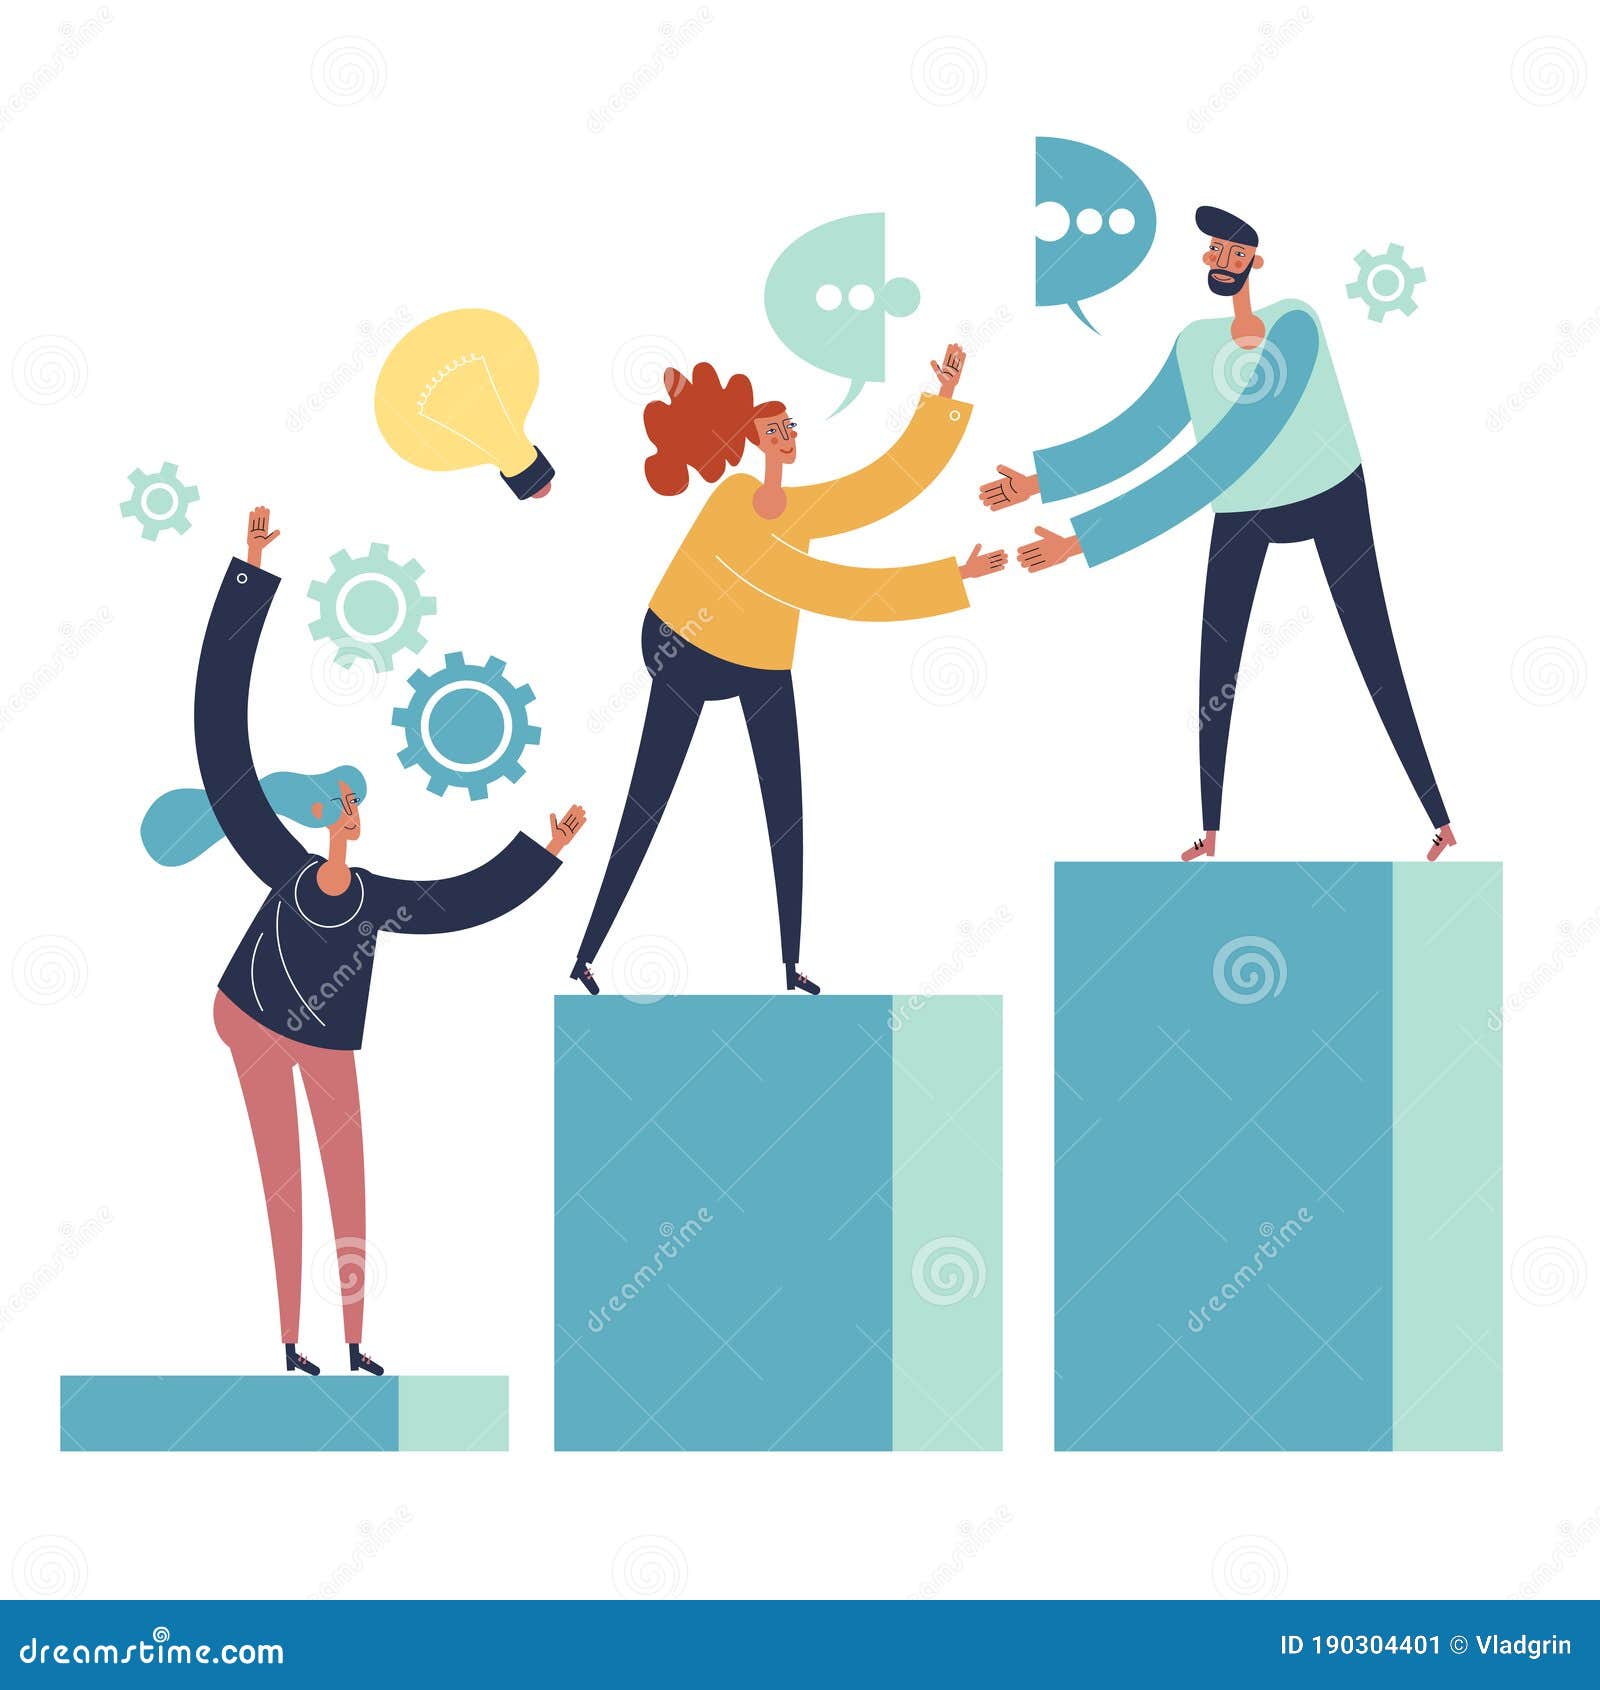 People Community Helping Each Other Stock Illustrations 1 People Community Helping Each Other Stock Illustrations Vectors Clipart Dreamstime